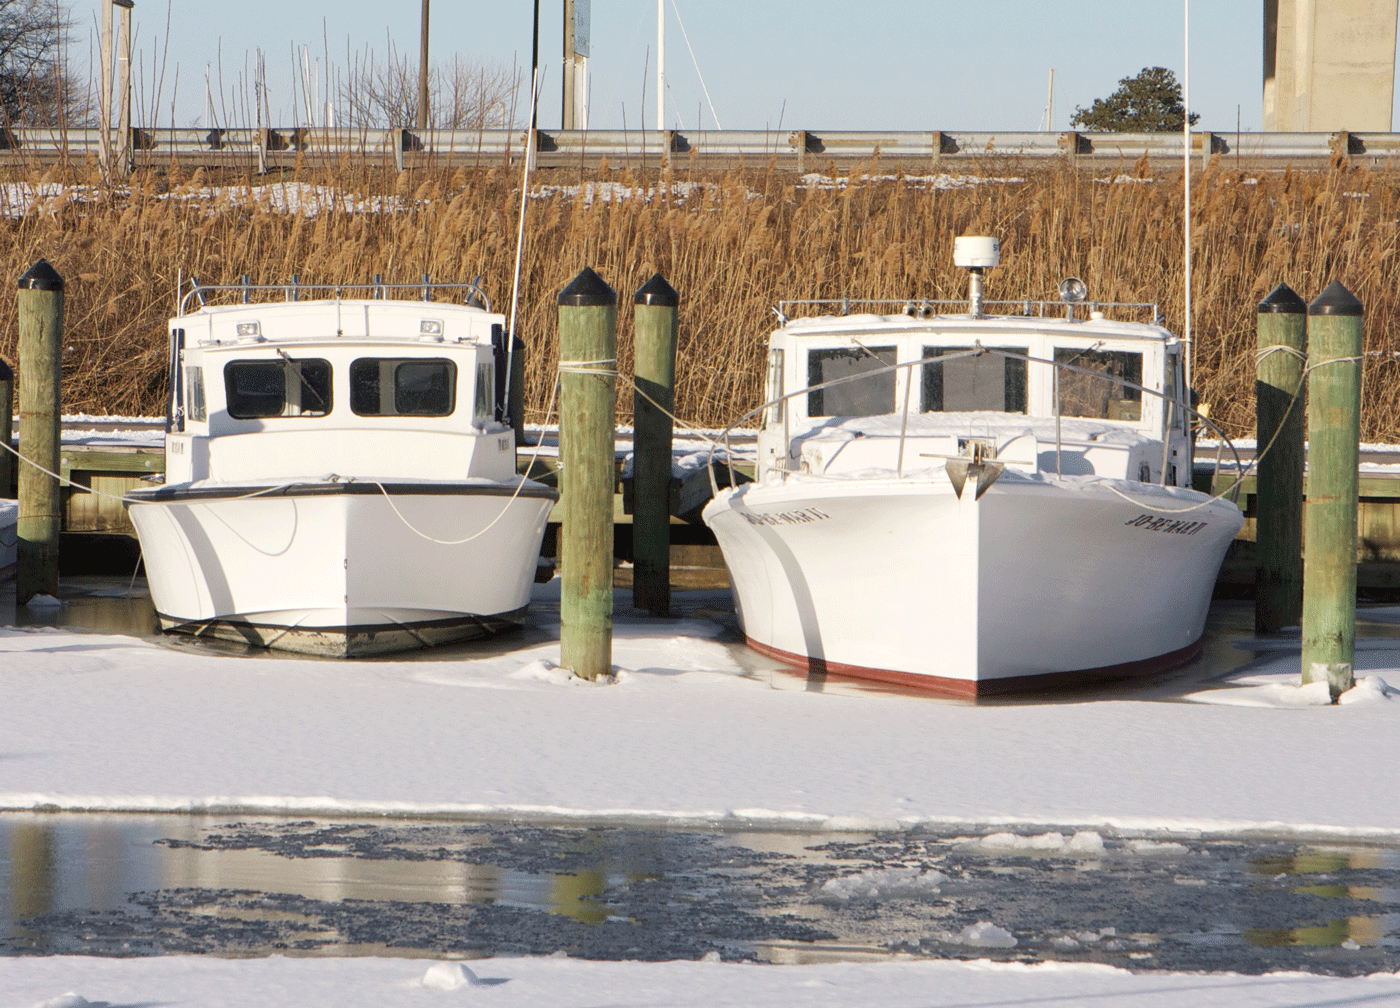 Whether you store your boat in or out of the water this winter is entirely up to you, but boats stored in the water over winter require special care.